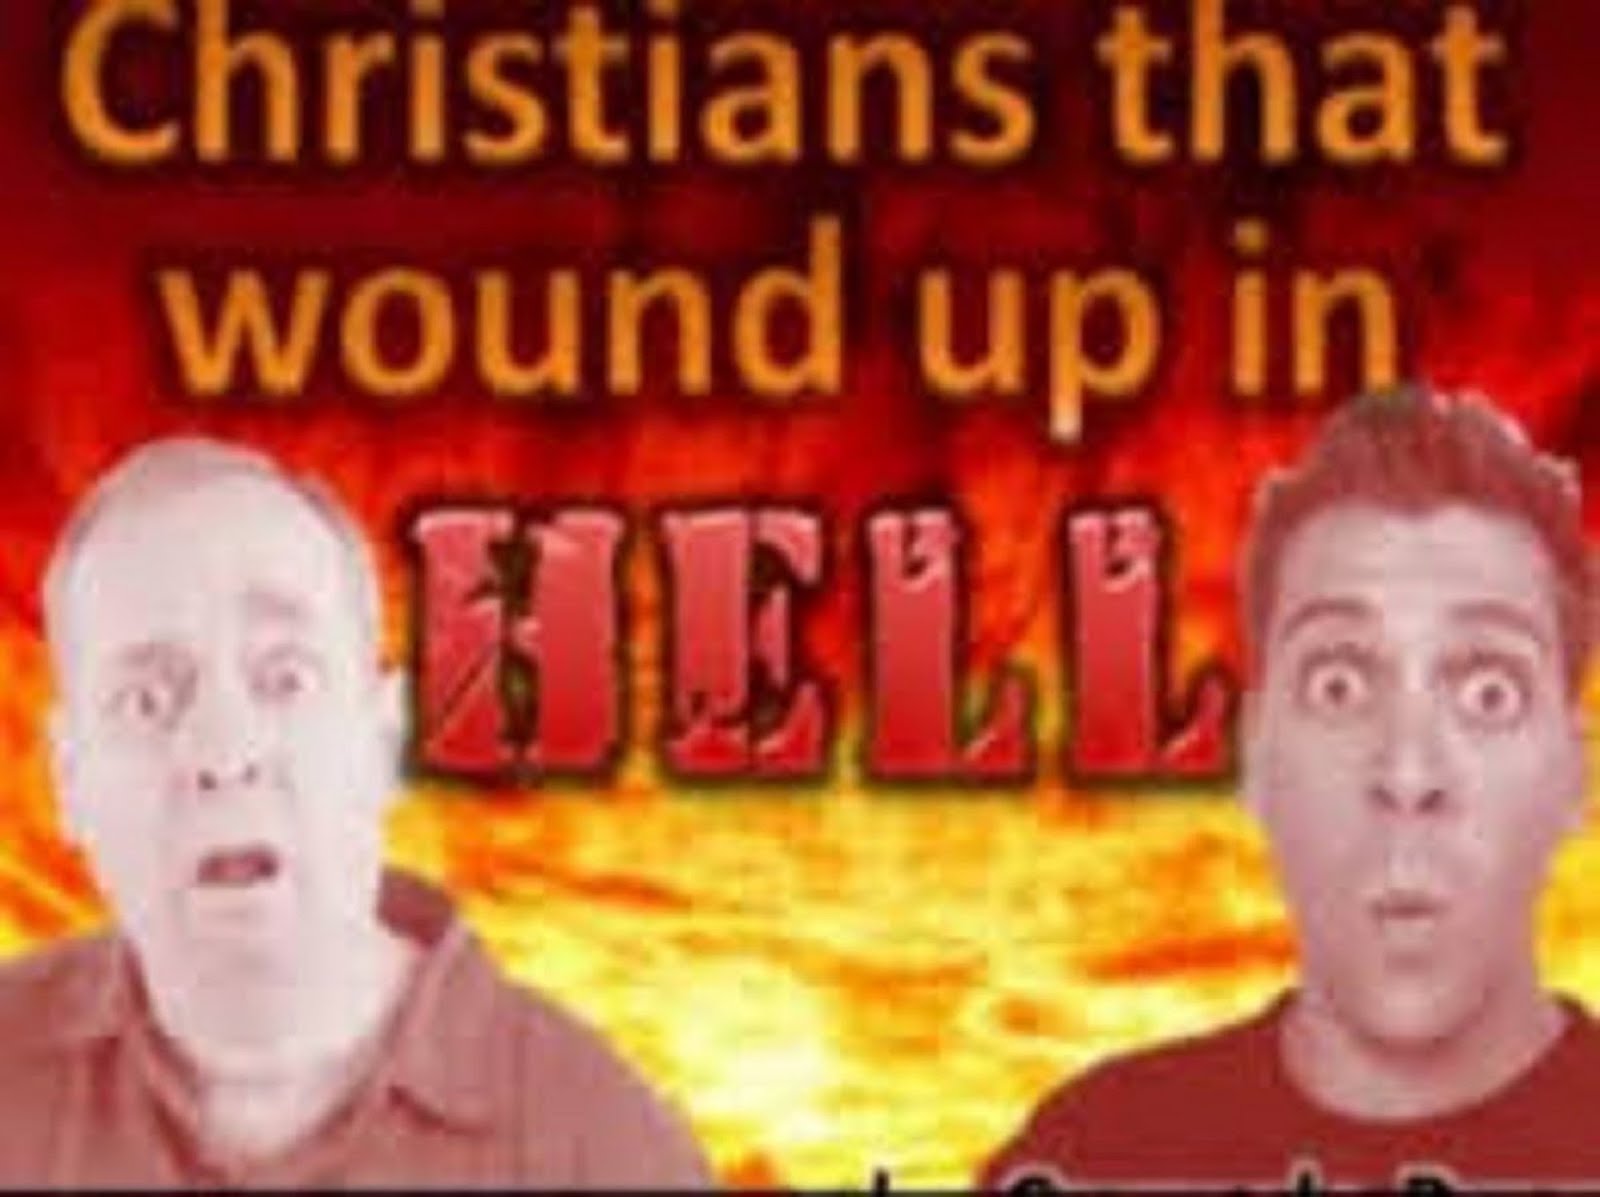 CHRISTIANS THAT WOUND UP IN HELL